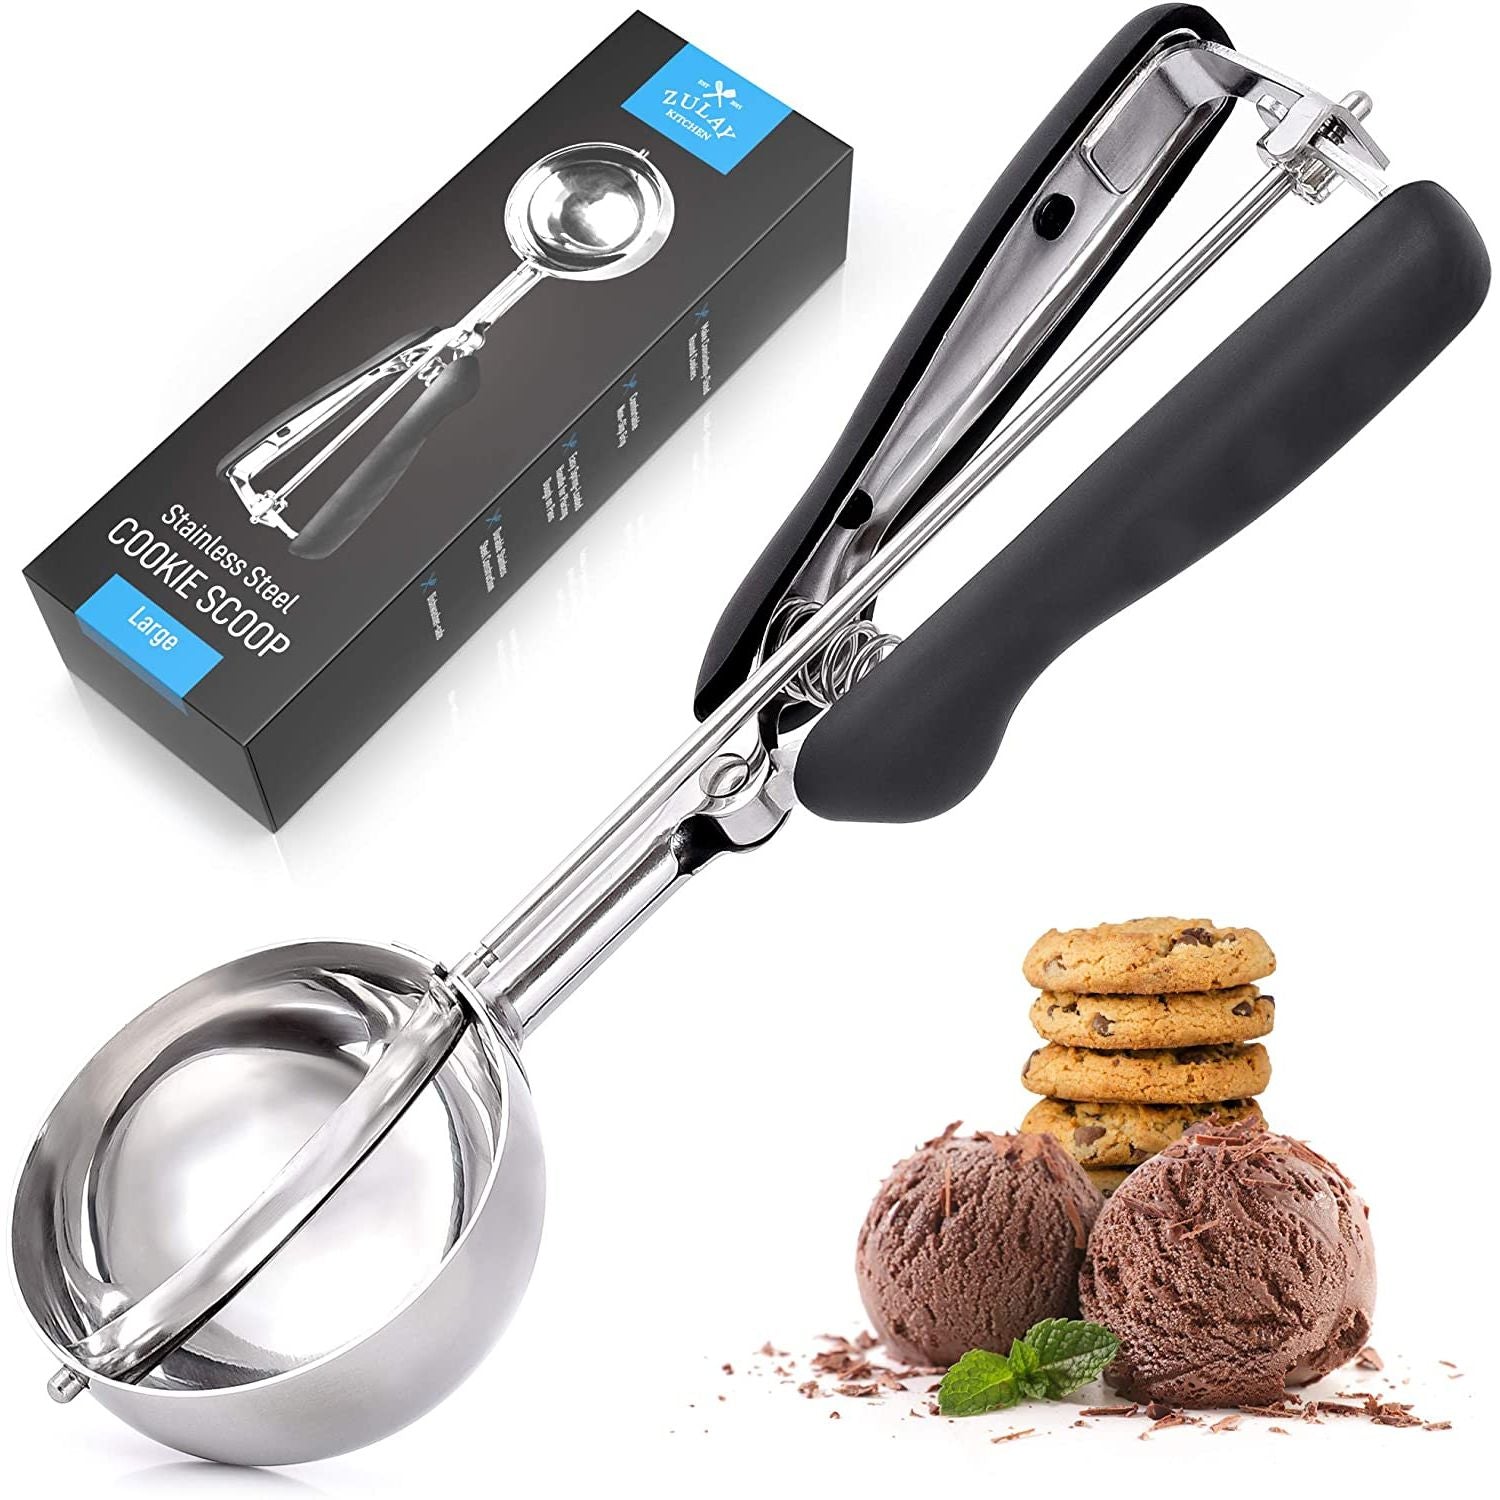 Ice Cream Scoop Set, Cookie Scoop Set, Multiple Size Large-Medium-Small  Size,Stainless Steel Cupcake Scoop for Cookies, Ice Cream, Cupcakes,  Meatballs 